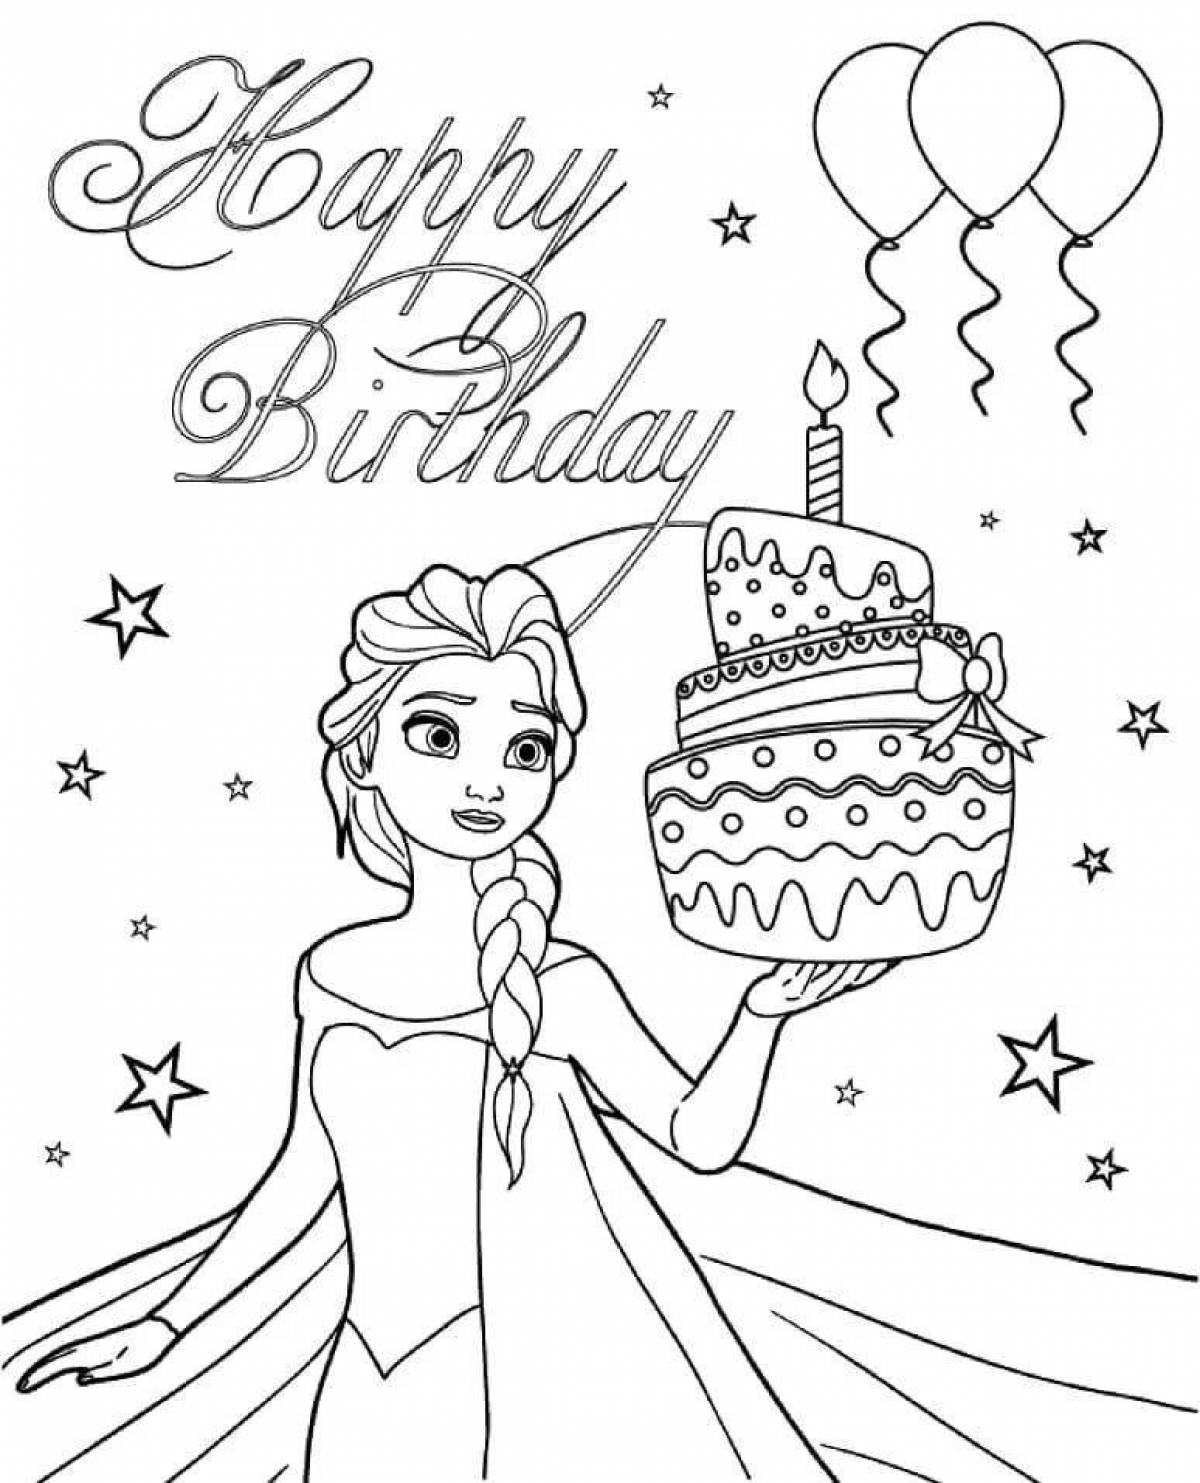 Live birthday card for a girl